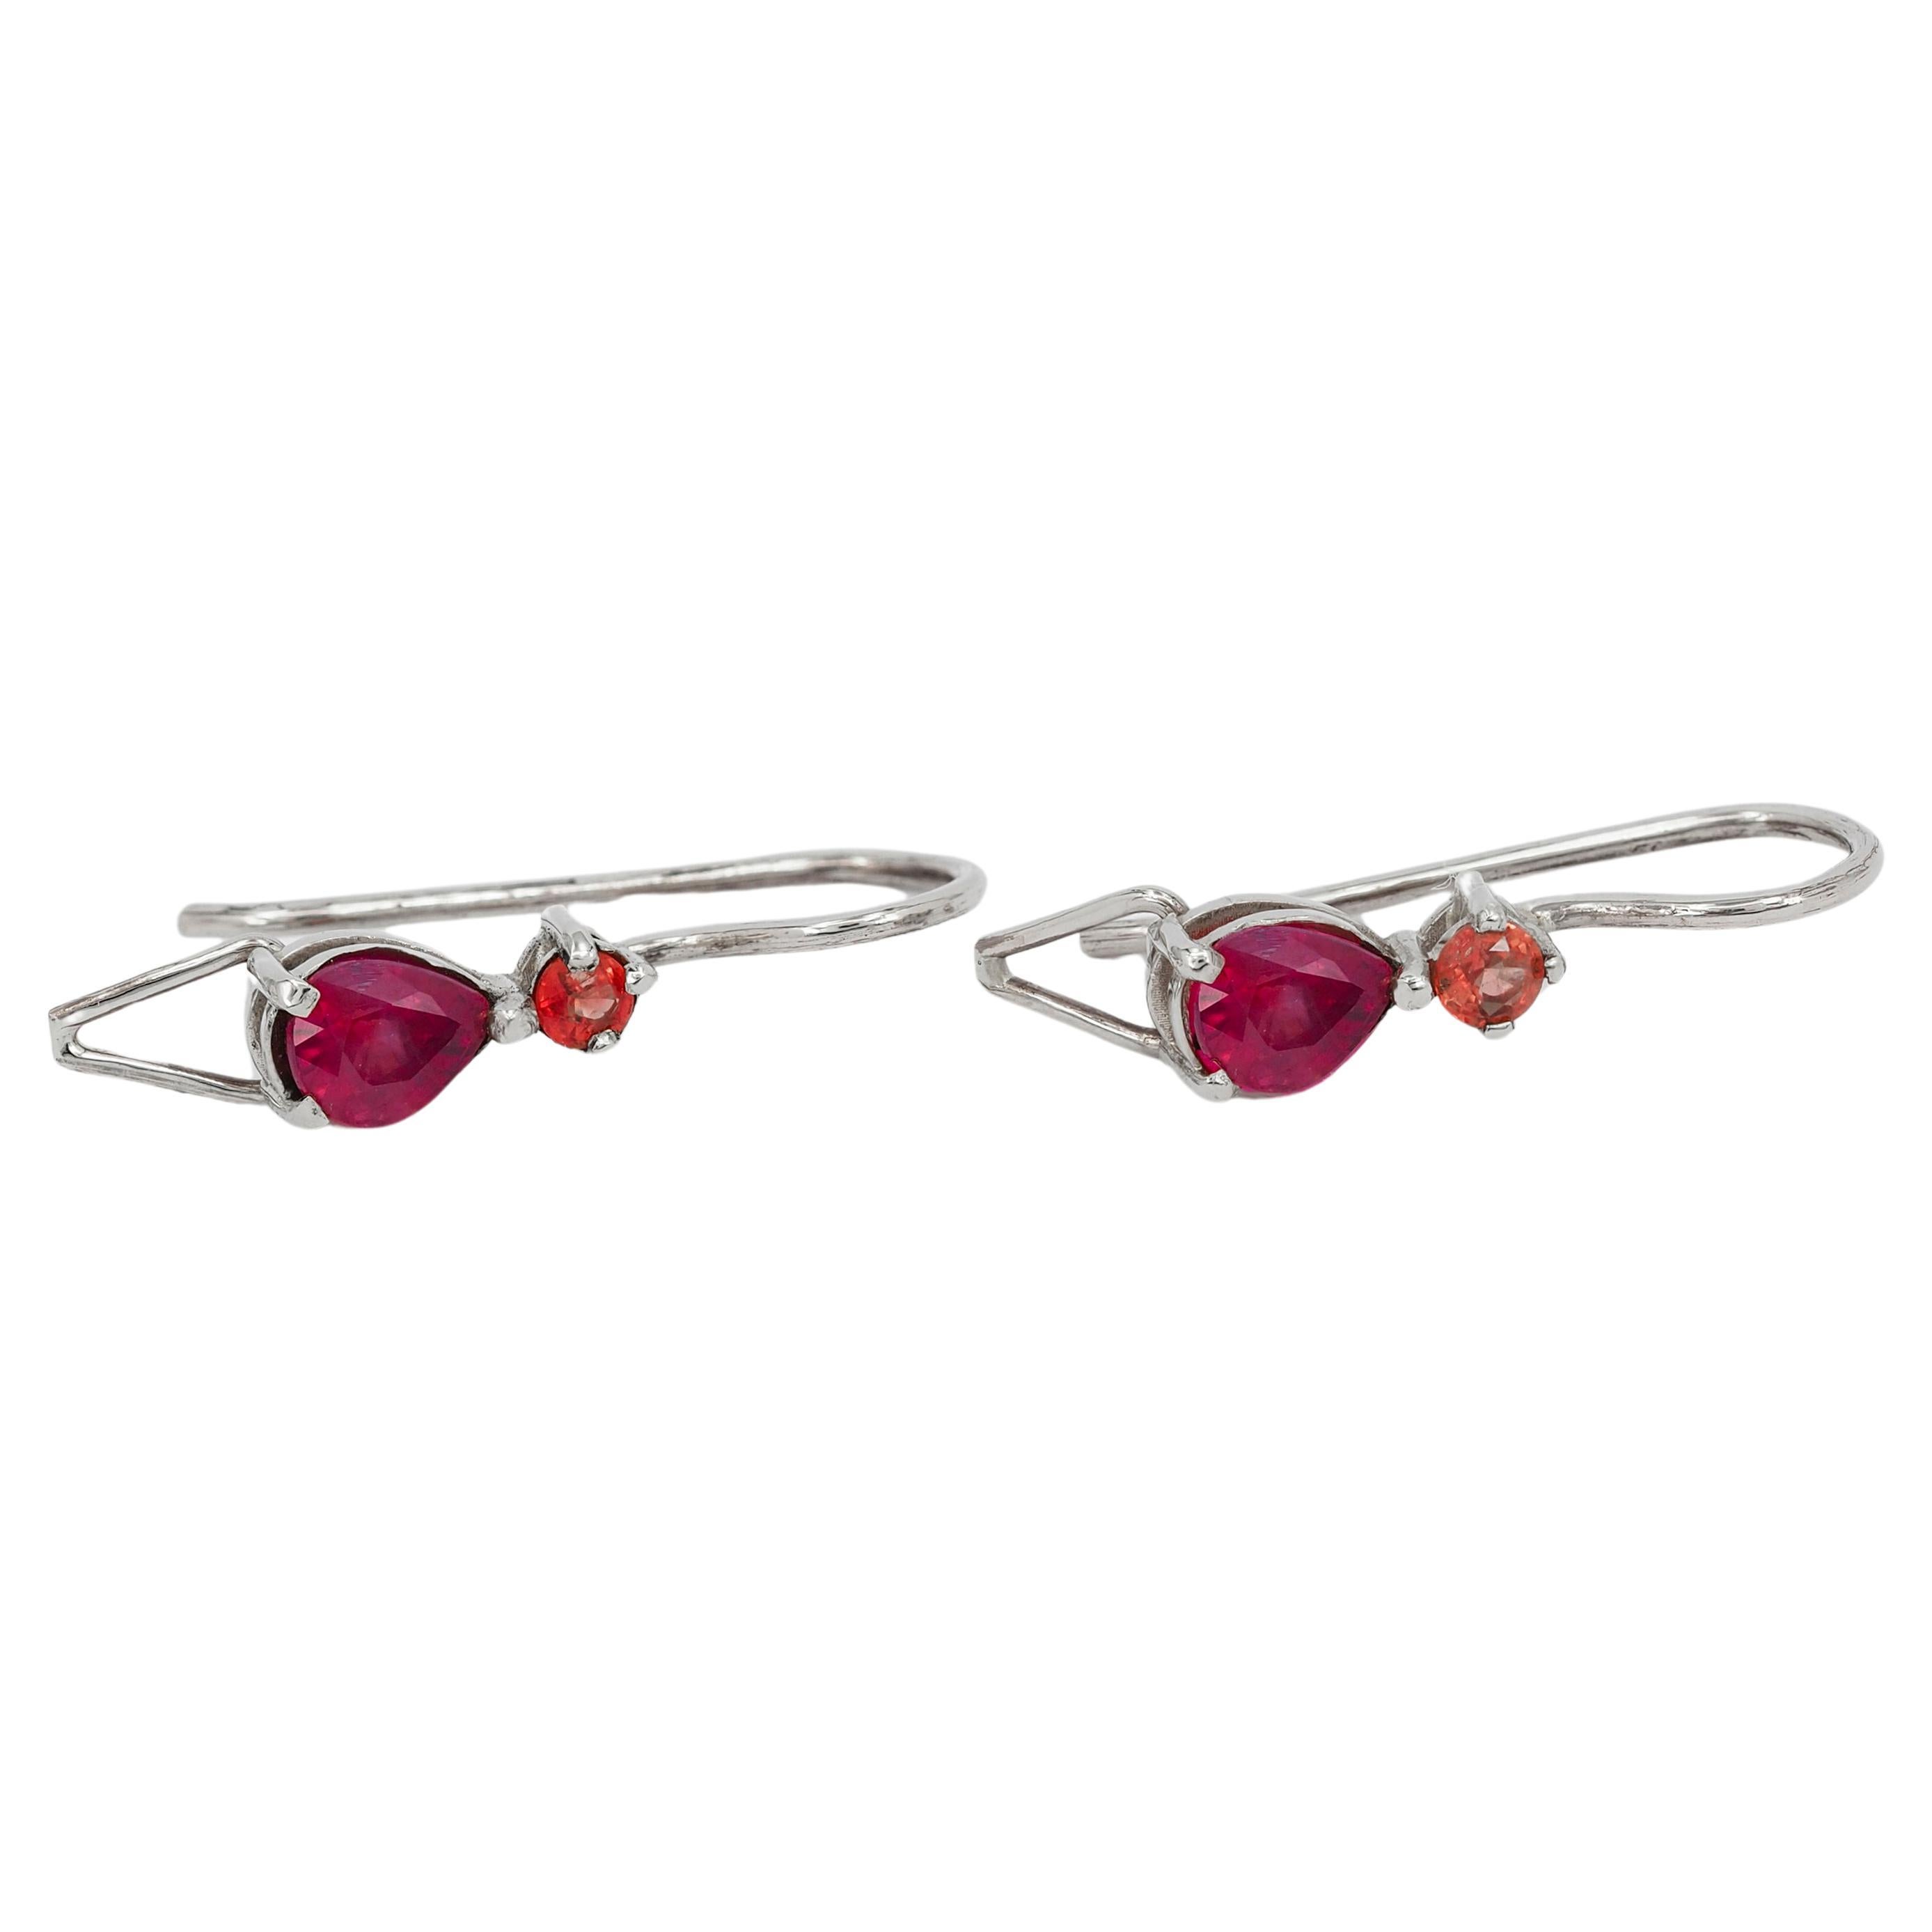 Genuine 1 ct rubies and sapphires earrings.  For Sale